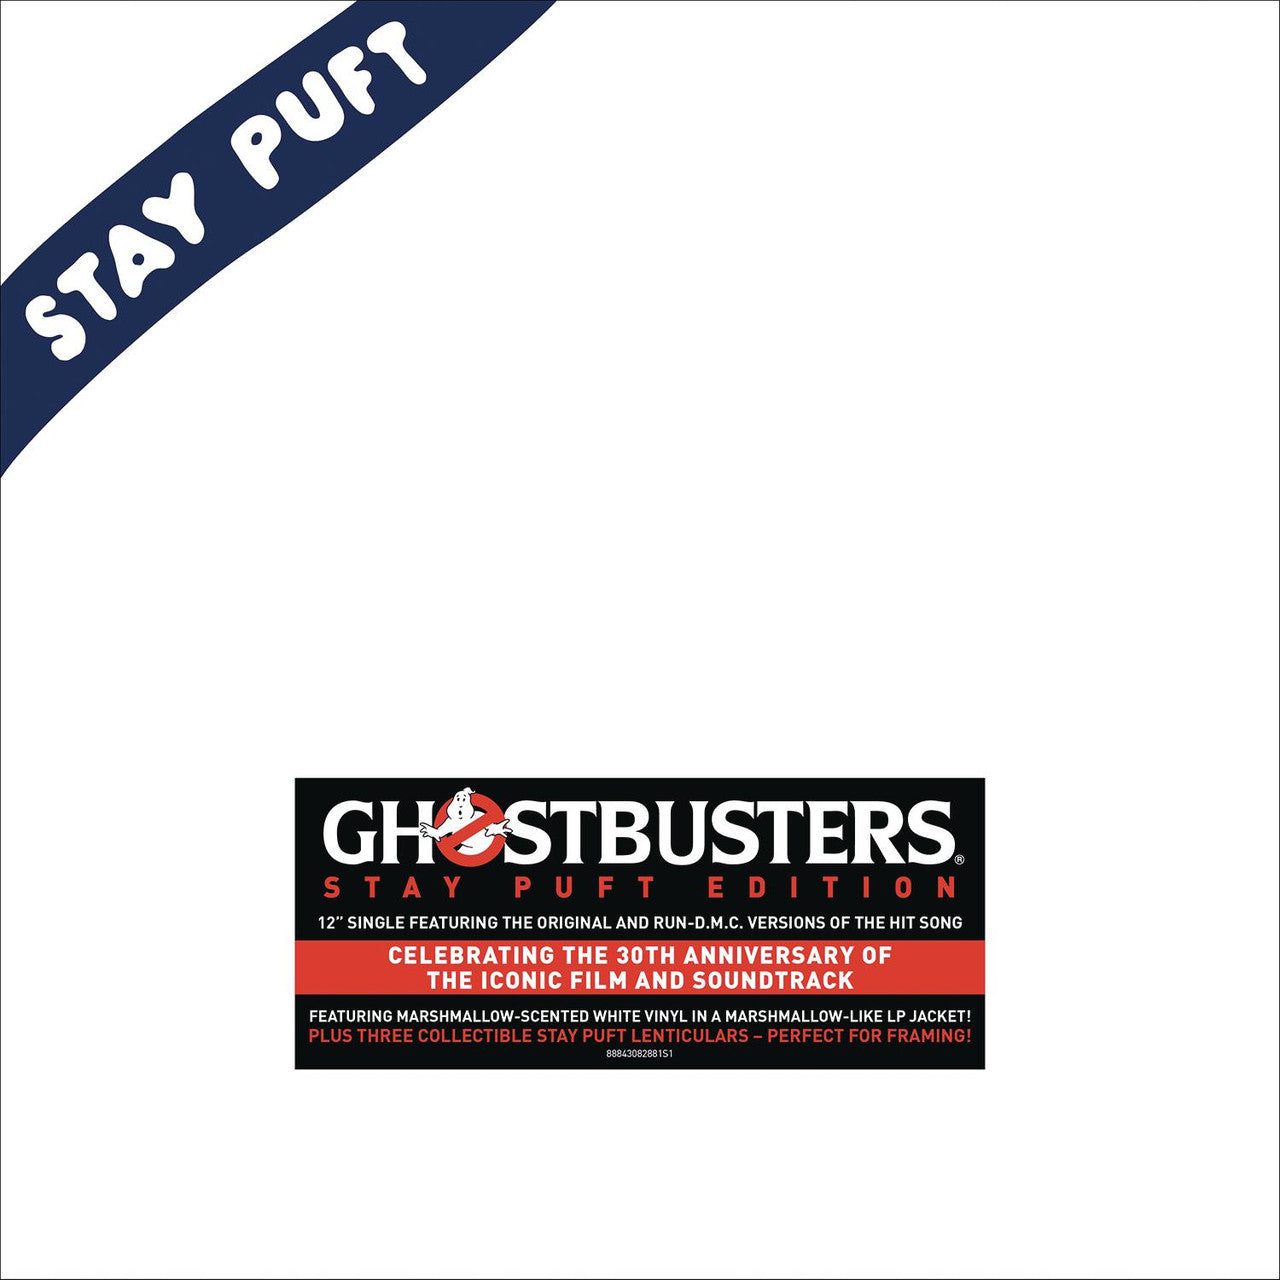 Ghostbusters Stay Puft Edition (12" Single Booklet)